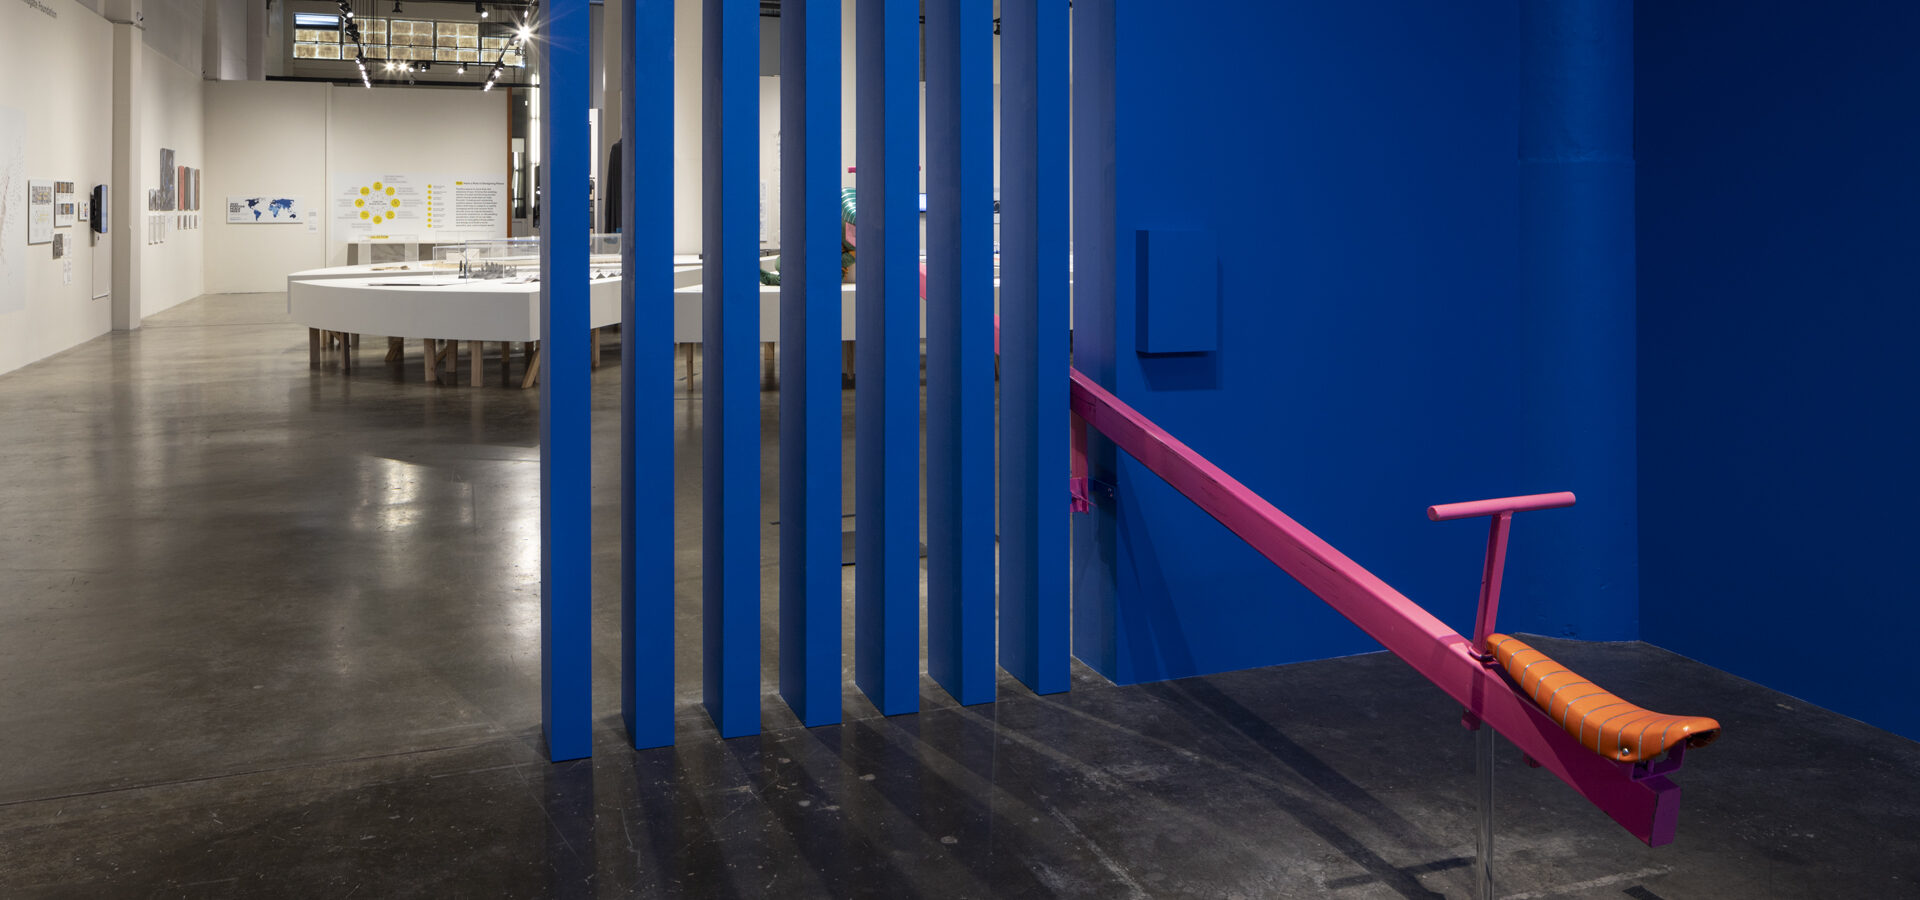 Artwork installation at the Museum of Craft and Design. Half of a pink teeter-totter coming out of a blue slatted wall.